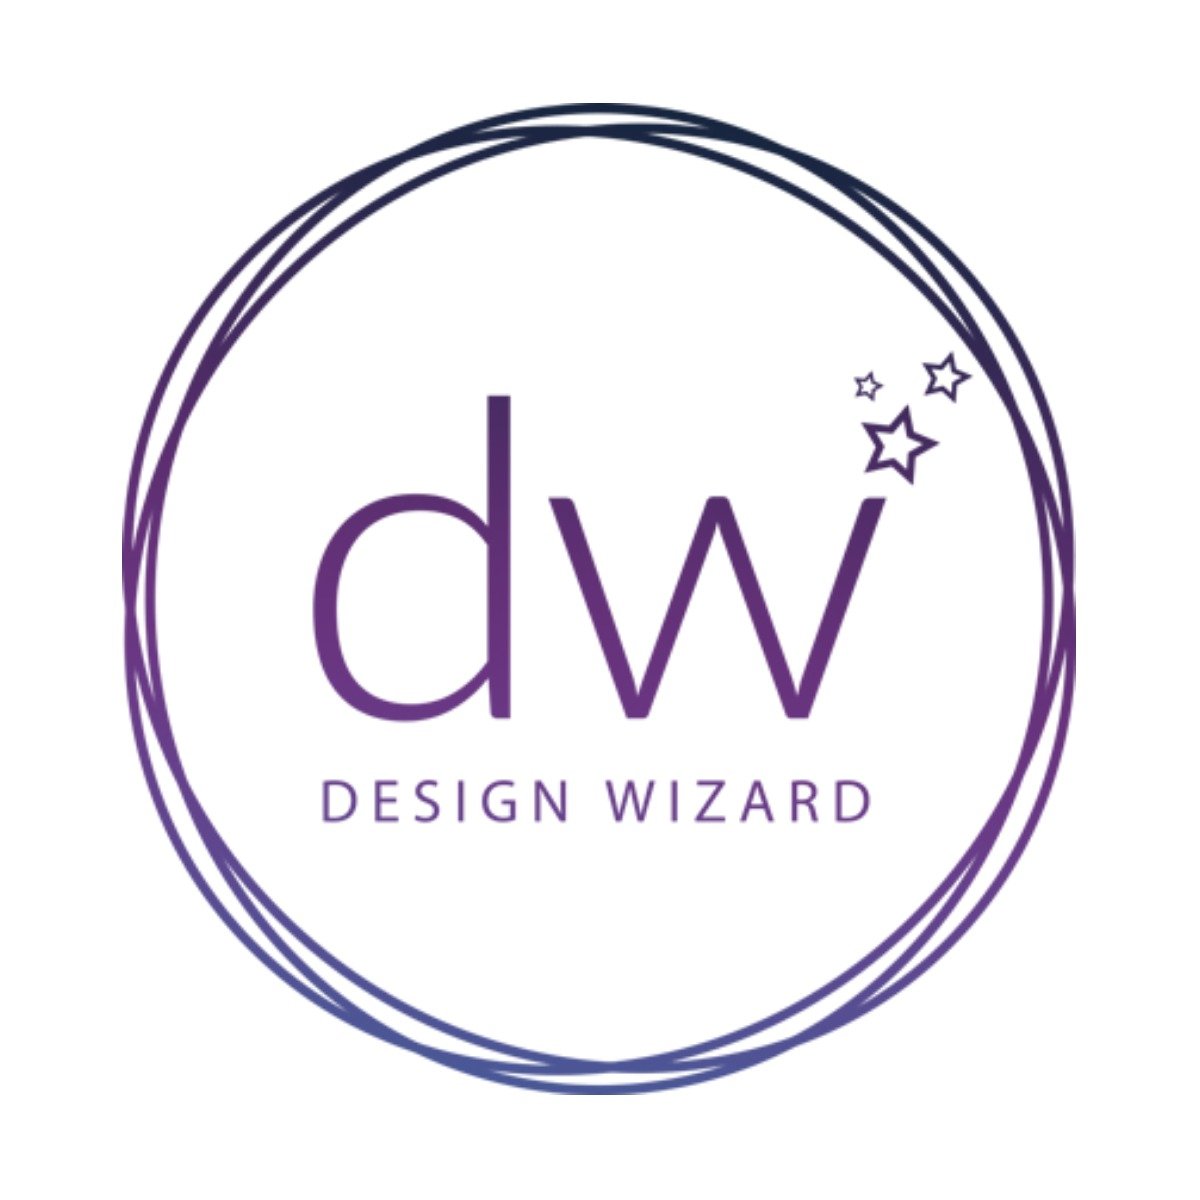 Design Wizard: Unleash your design magic with our easy-to-use online tools.